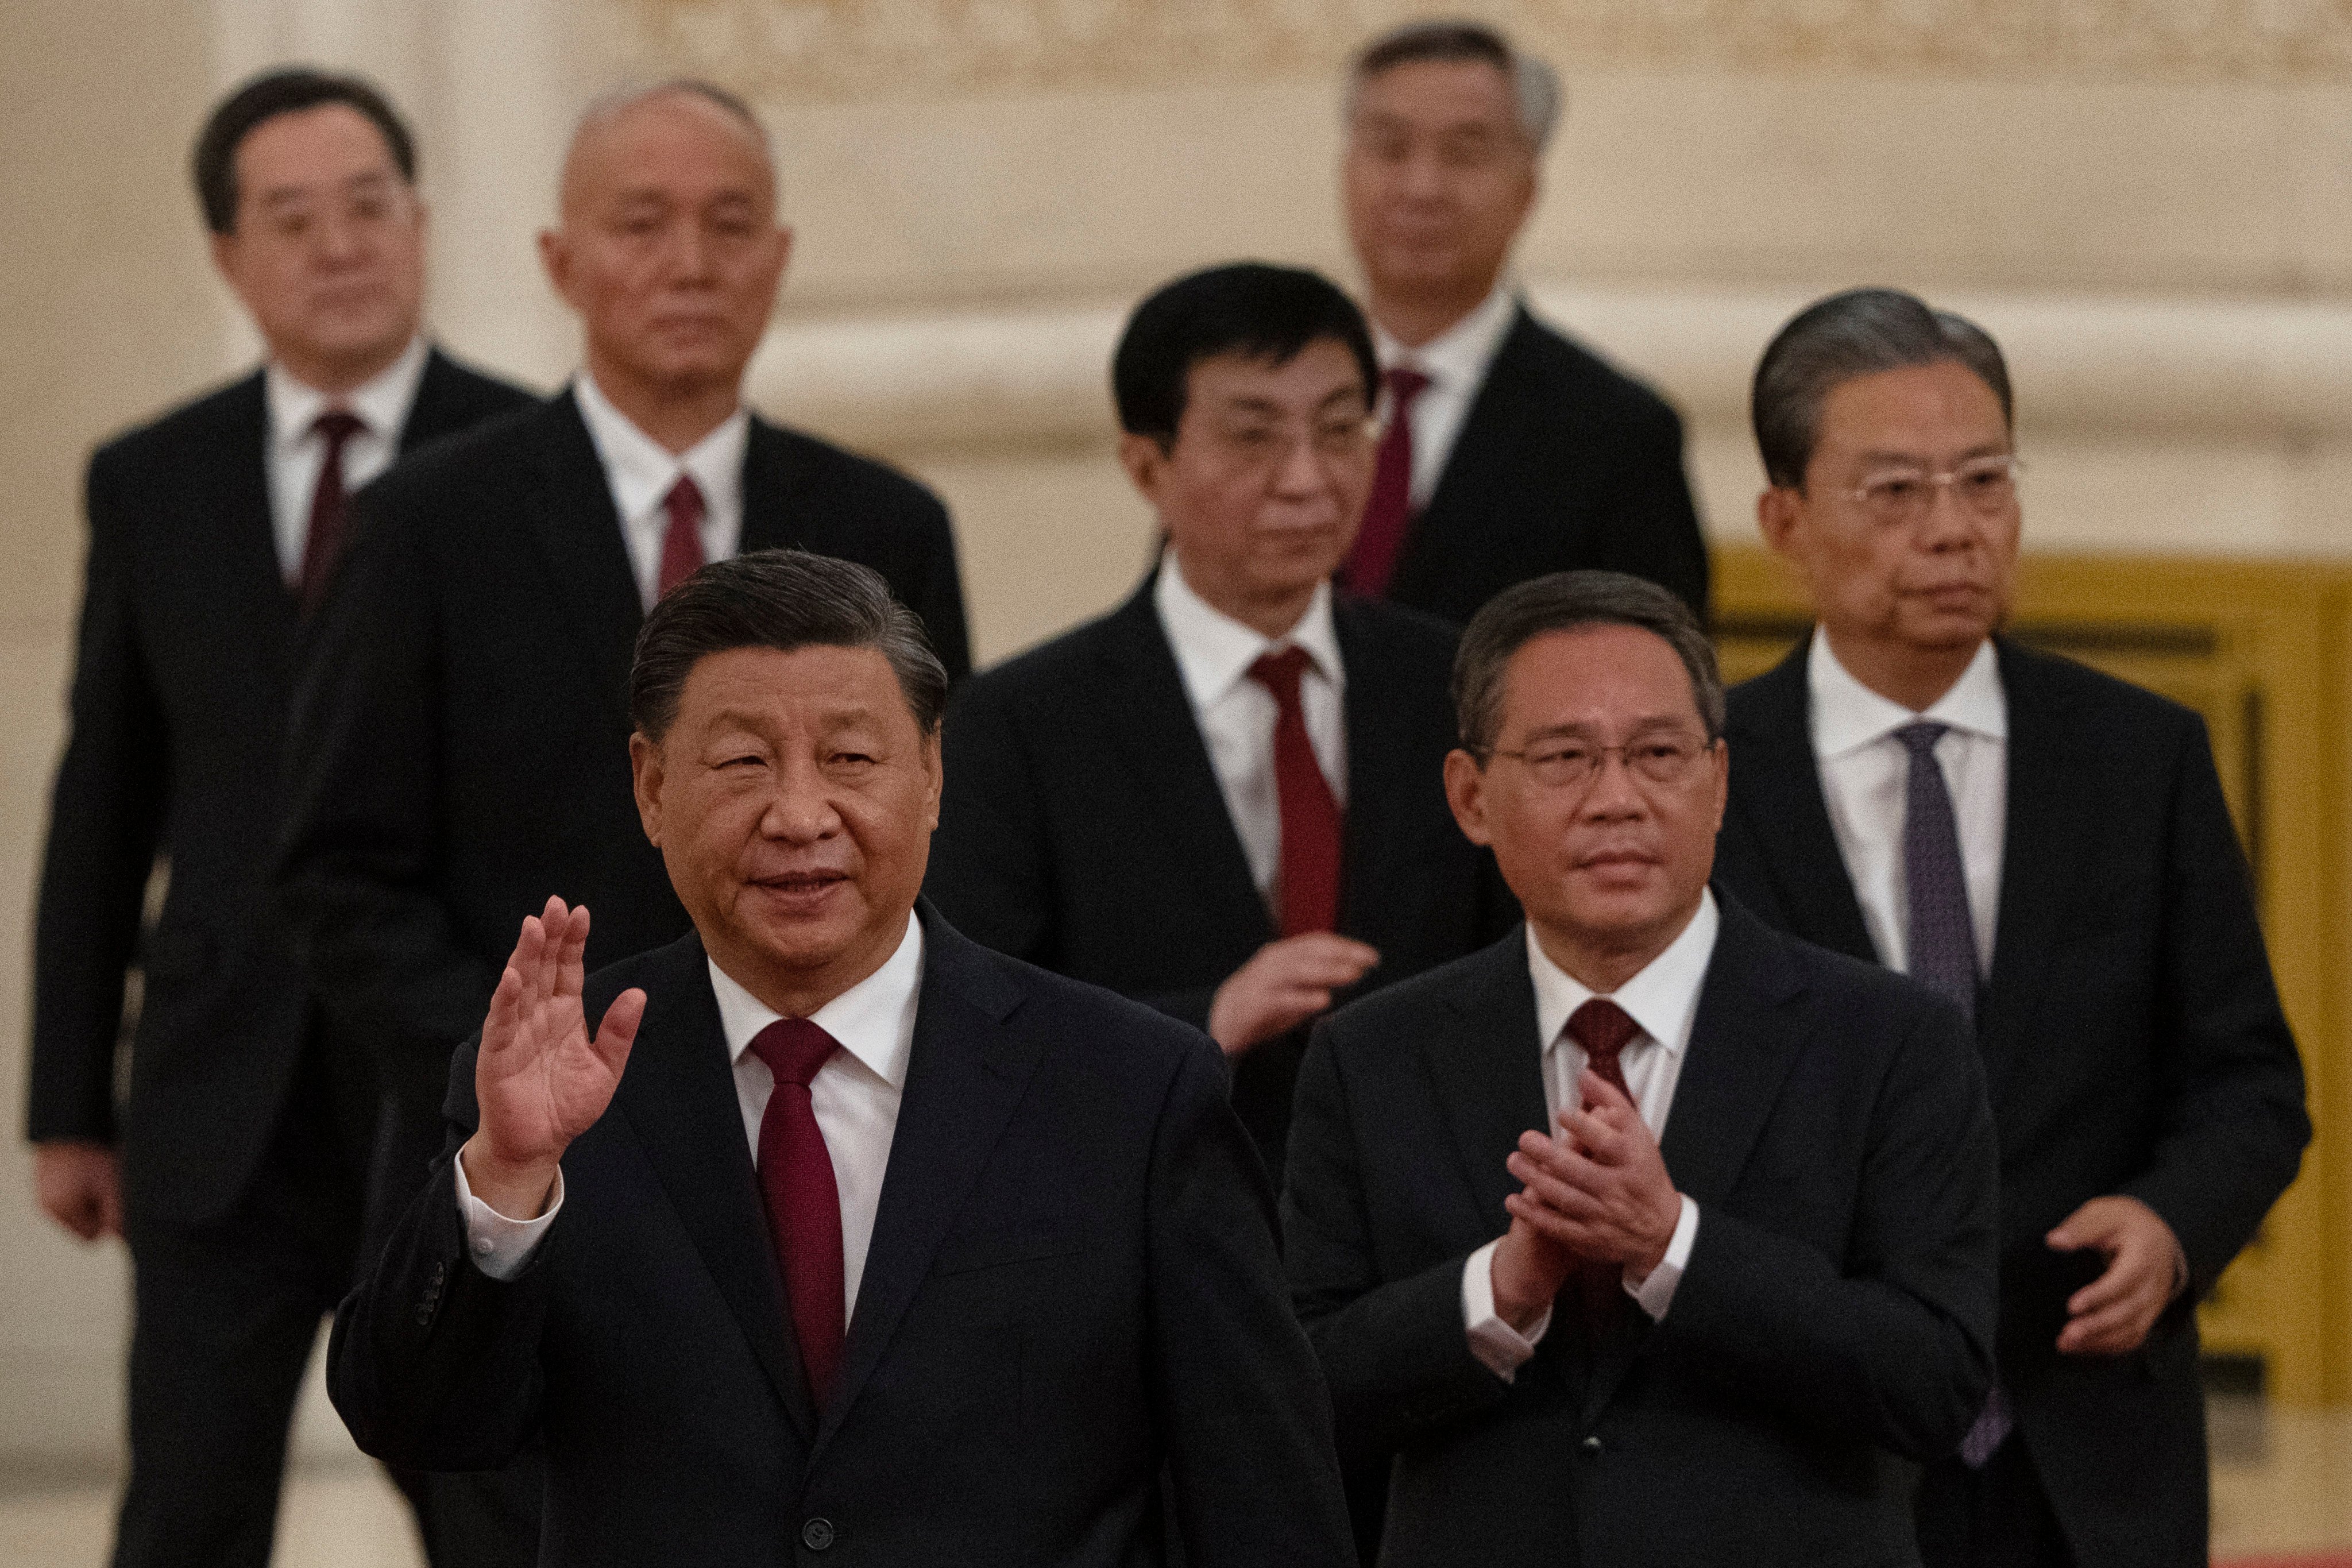 President Xi Jinping is joined by Politburo members (from front to back) Li Qiang, Zhao Leji, Wang Huning, Cai Qi, Ding Xuexiang and Li Xi, at the Great Hall of the People in Beijing on October 23. Photo: AP